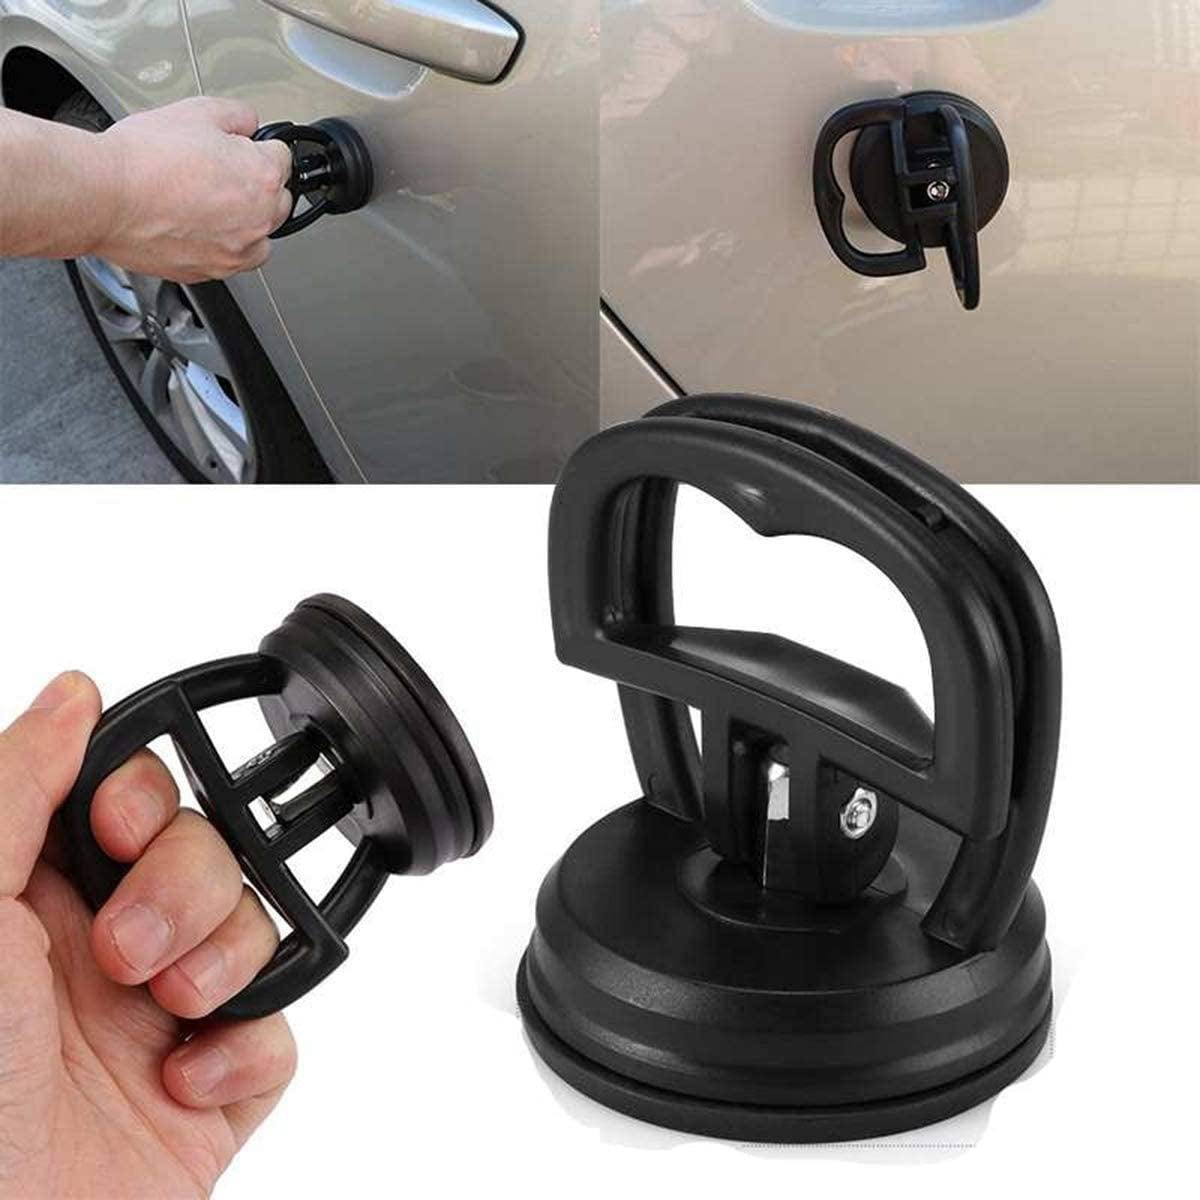 Dent Repair Sucker Plate Car Dent Remover Vacuum Suction Cup Puller Lifter with Double Handle Locking,Glass Suction Tile Suction Cup Lifter Window Lifter Dent Puller 